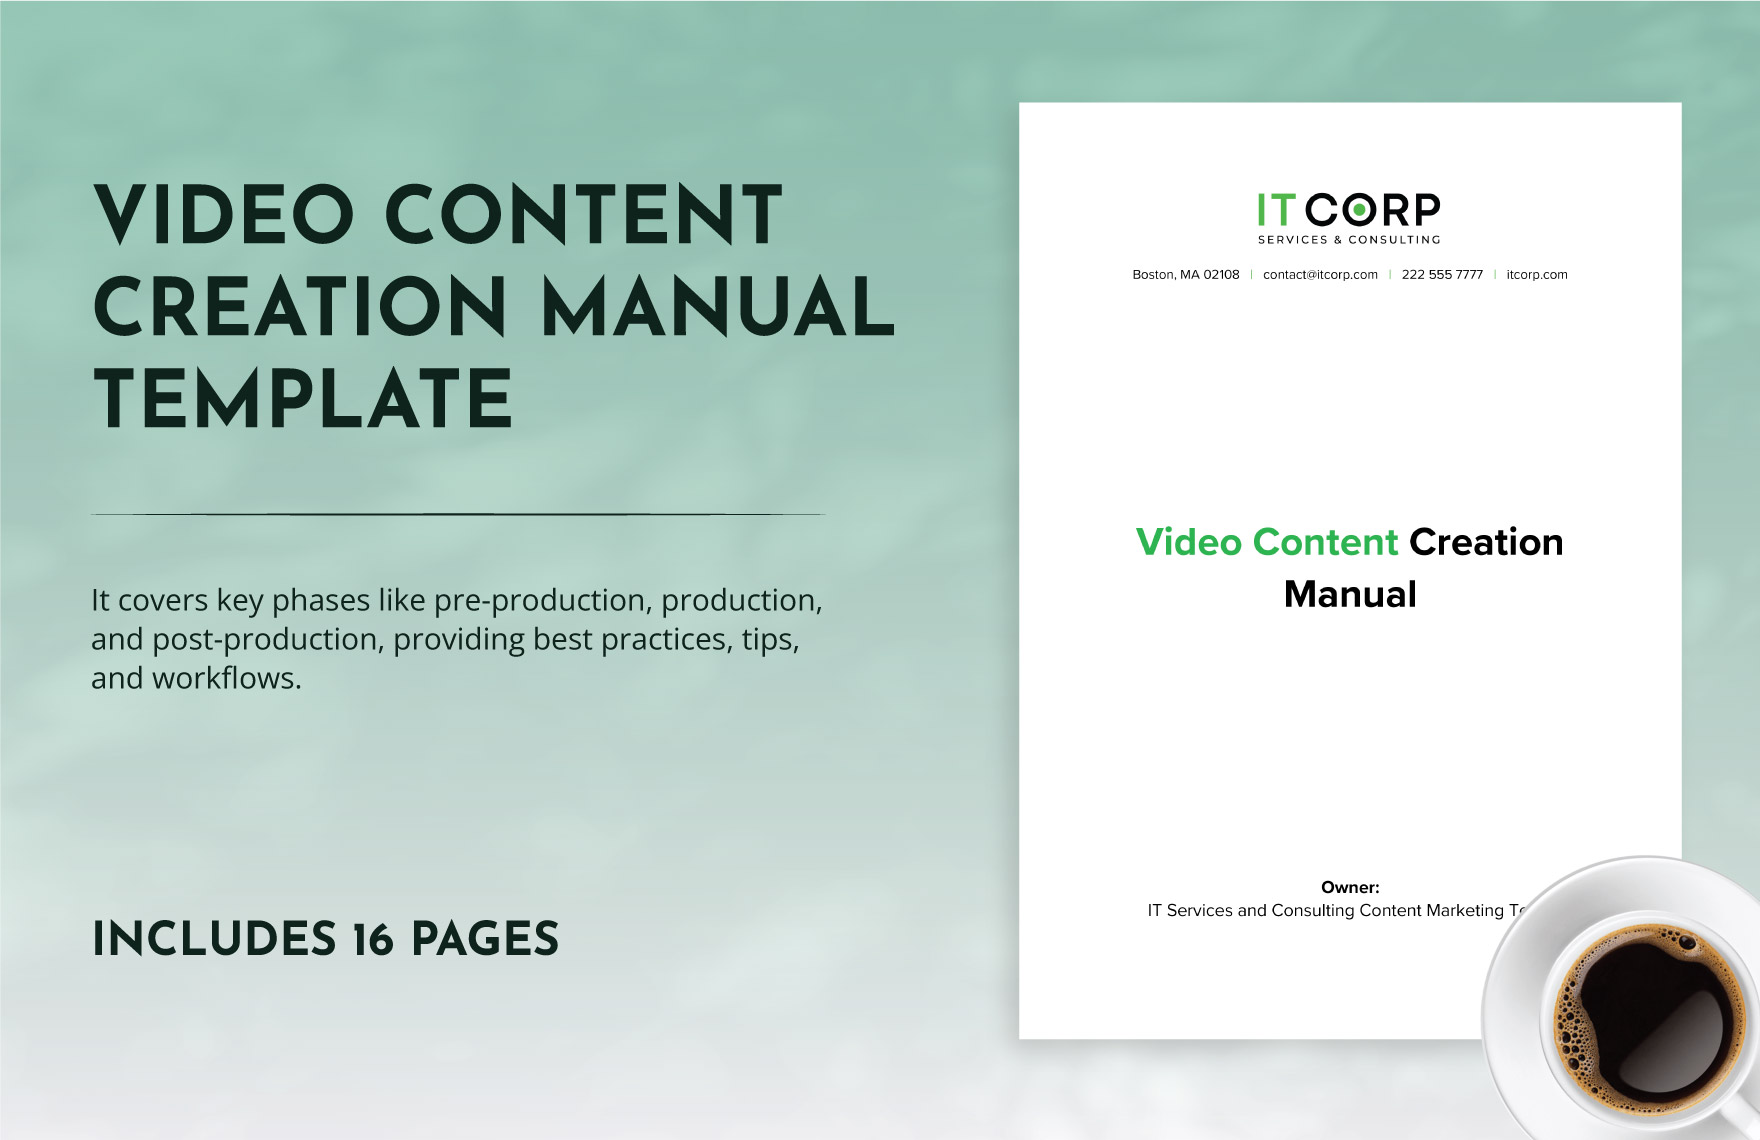 Video Content Creation Manual Template in Word, Google Docs, PDF